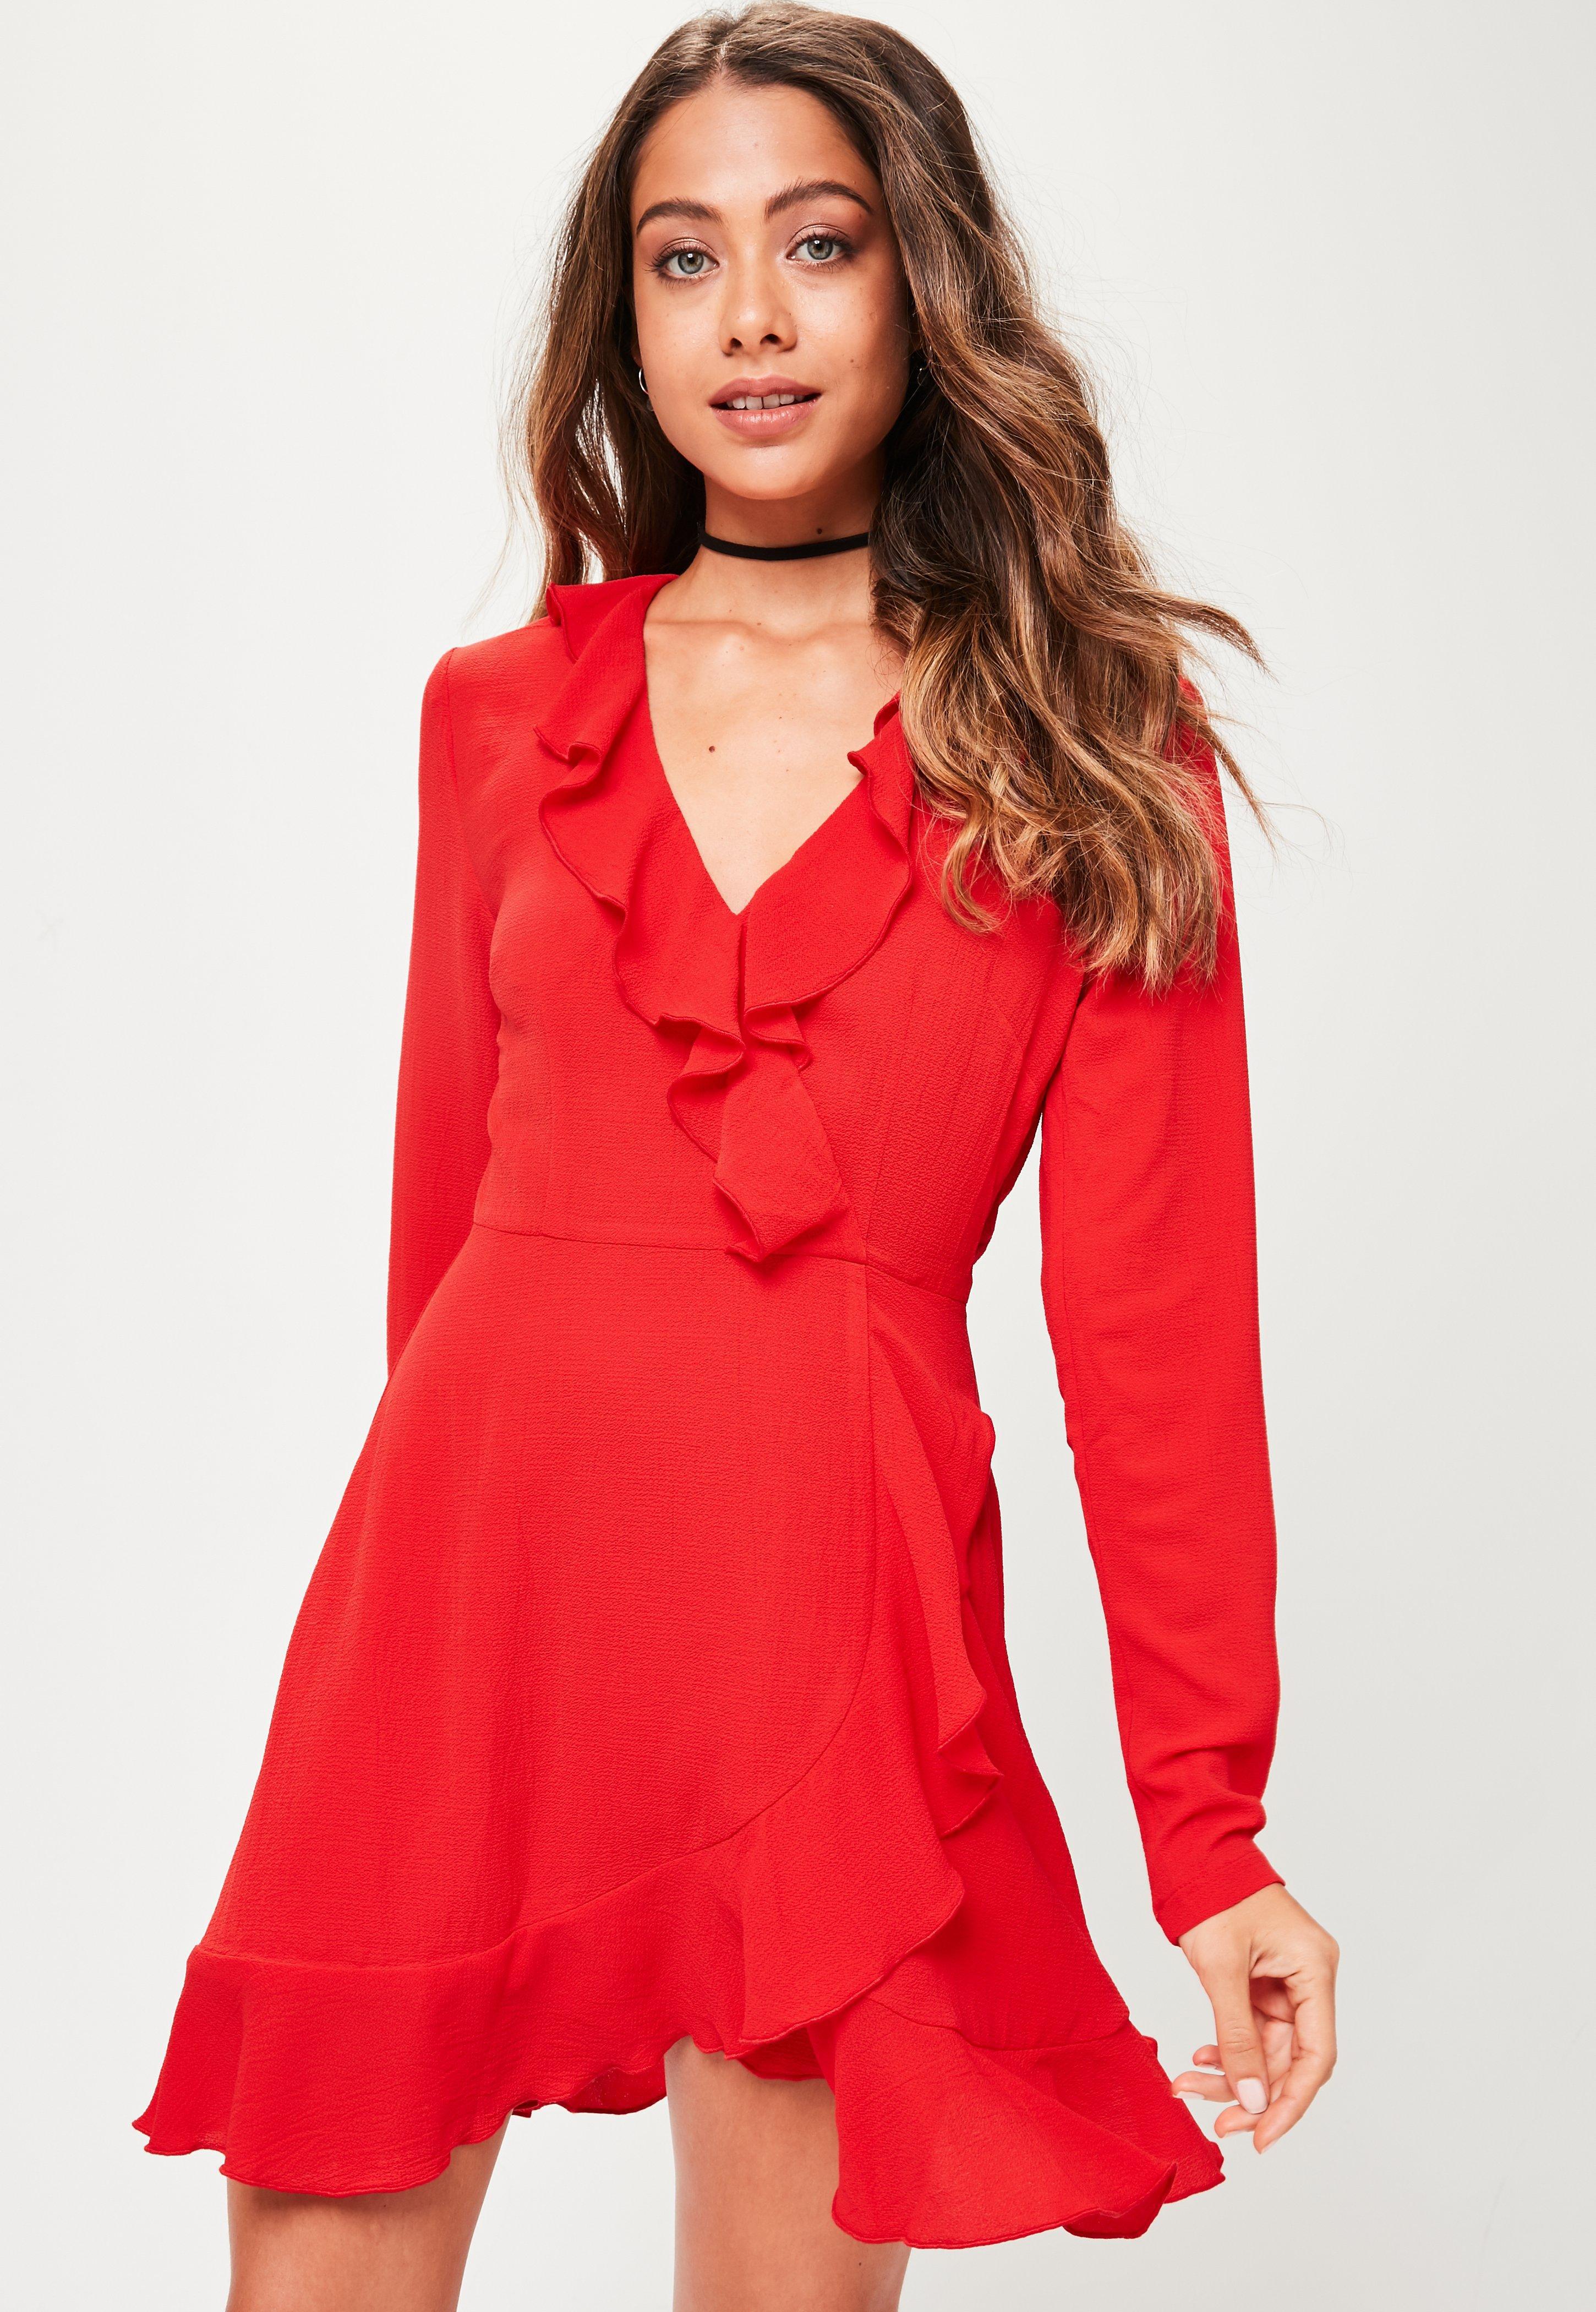 Lyst - Missguided Red Long Sleeve Plain Ruffle Tea Dress in Red